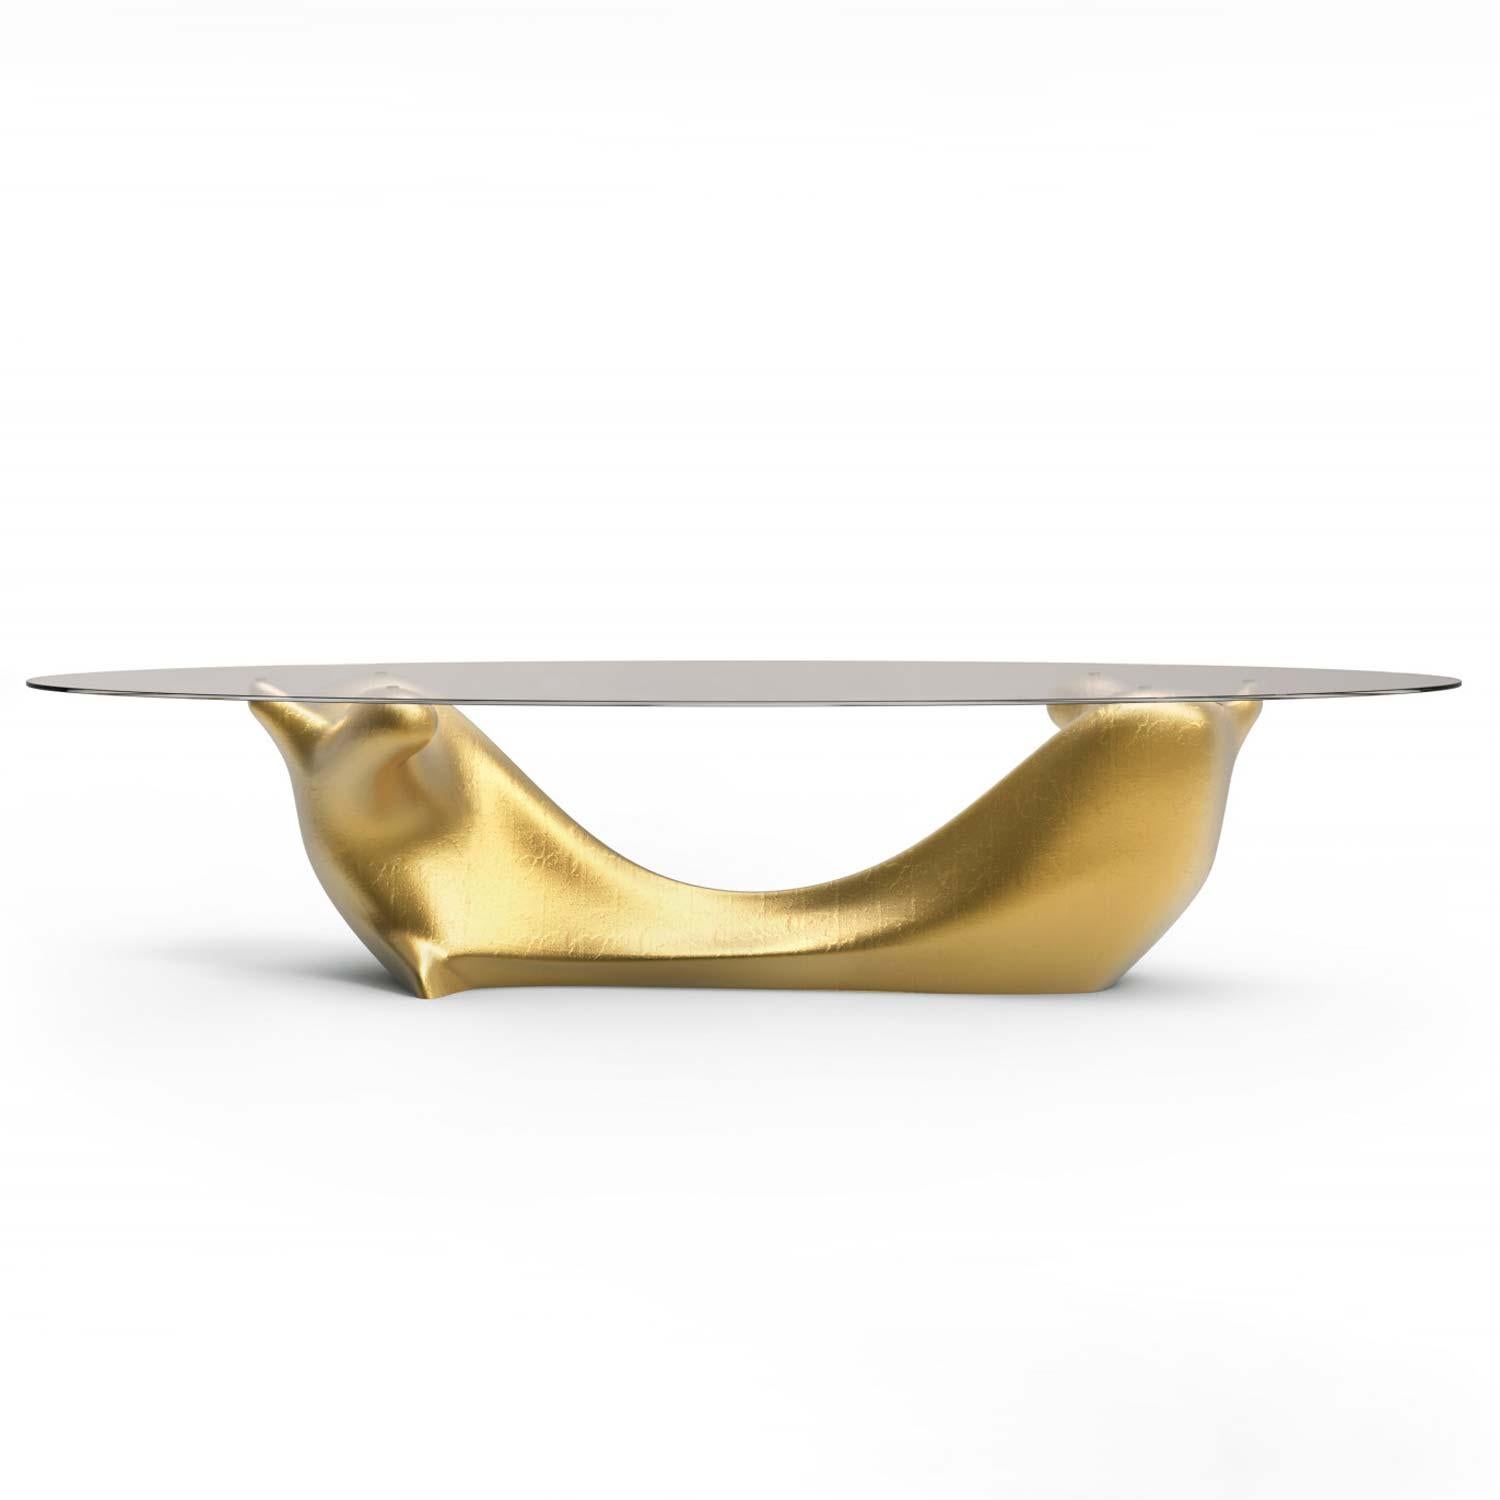 Contemporary Biomorphic Sculptural Dining Table In Gold Leaf